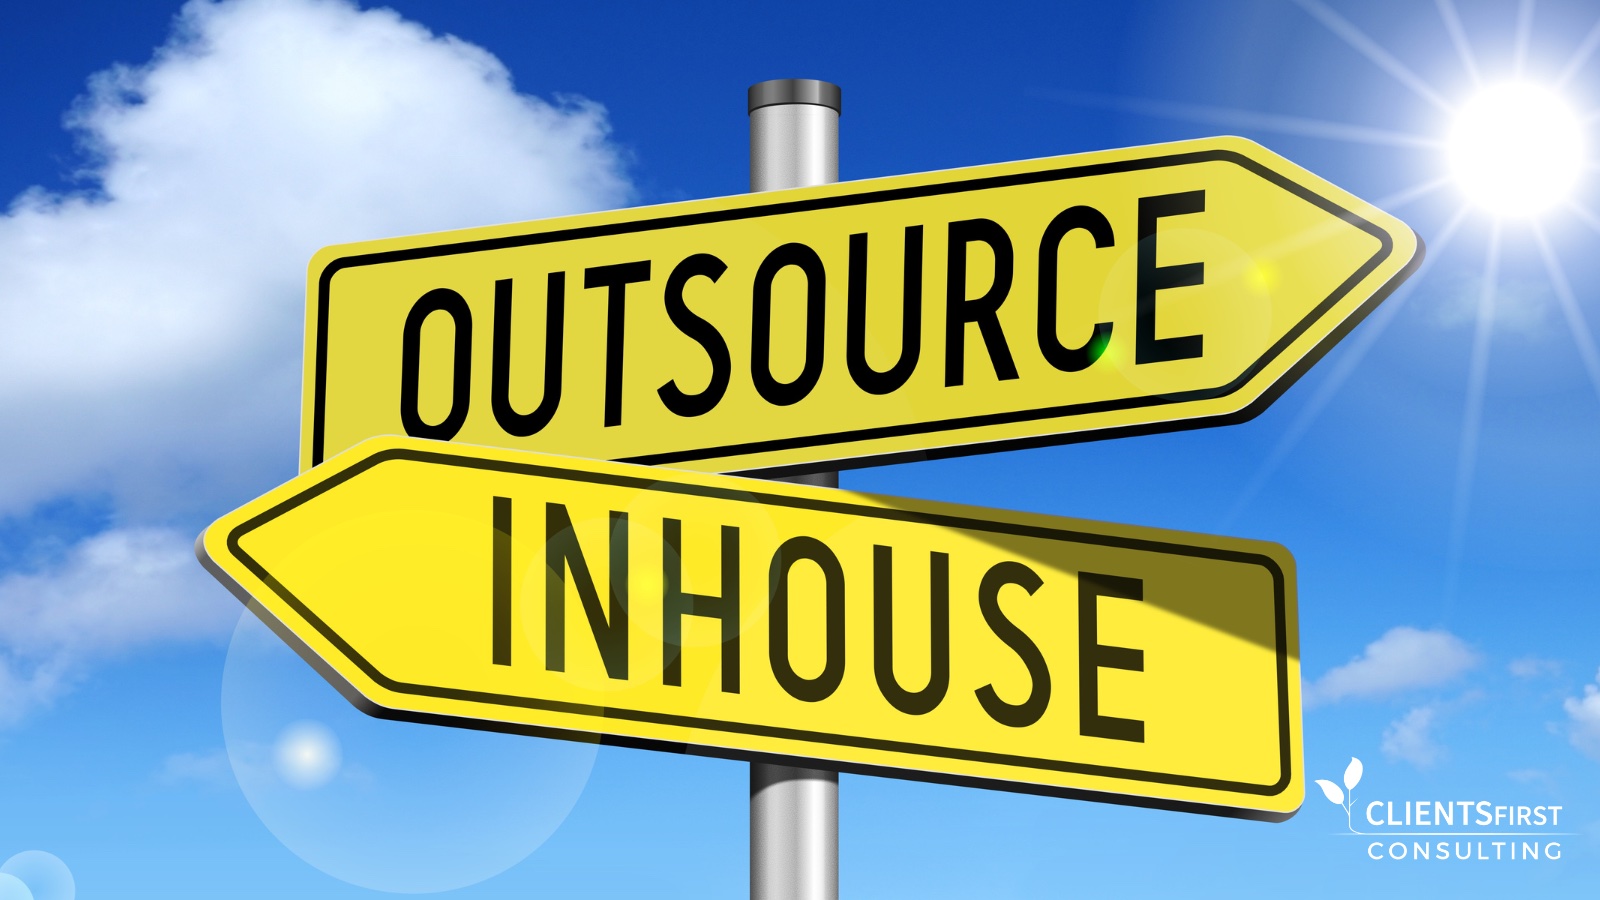 As Professional Services Firms Struggle With Staffing, Is Outsourcing The Answer?